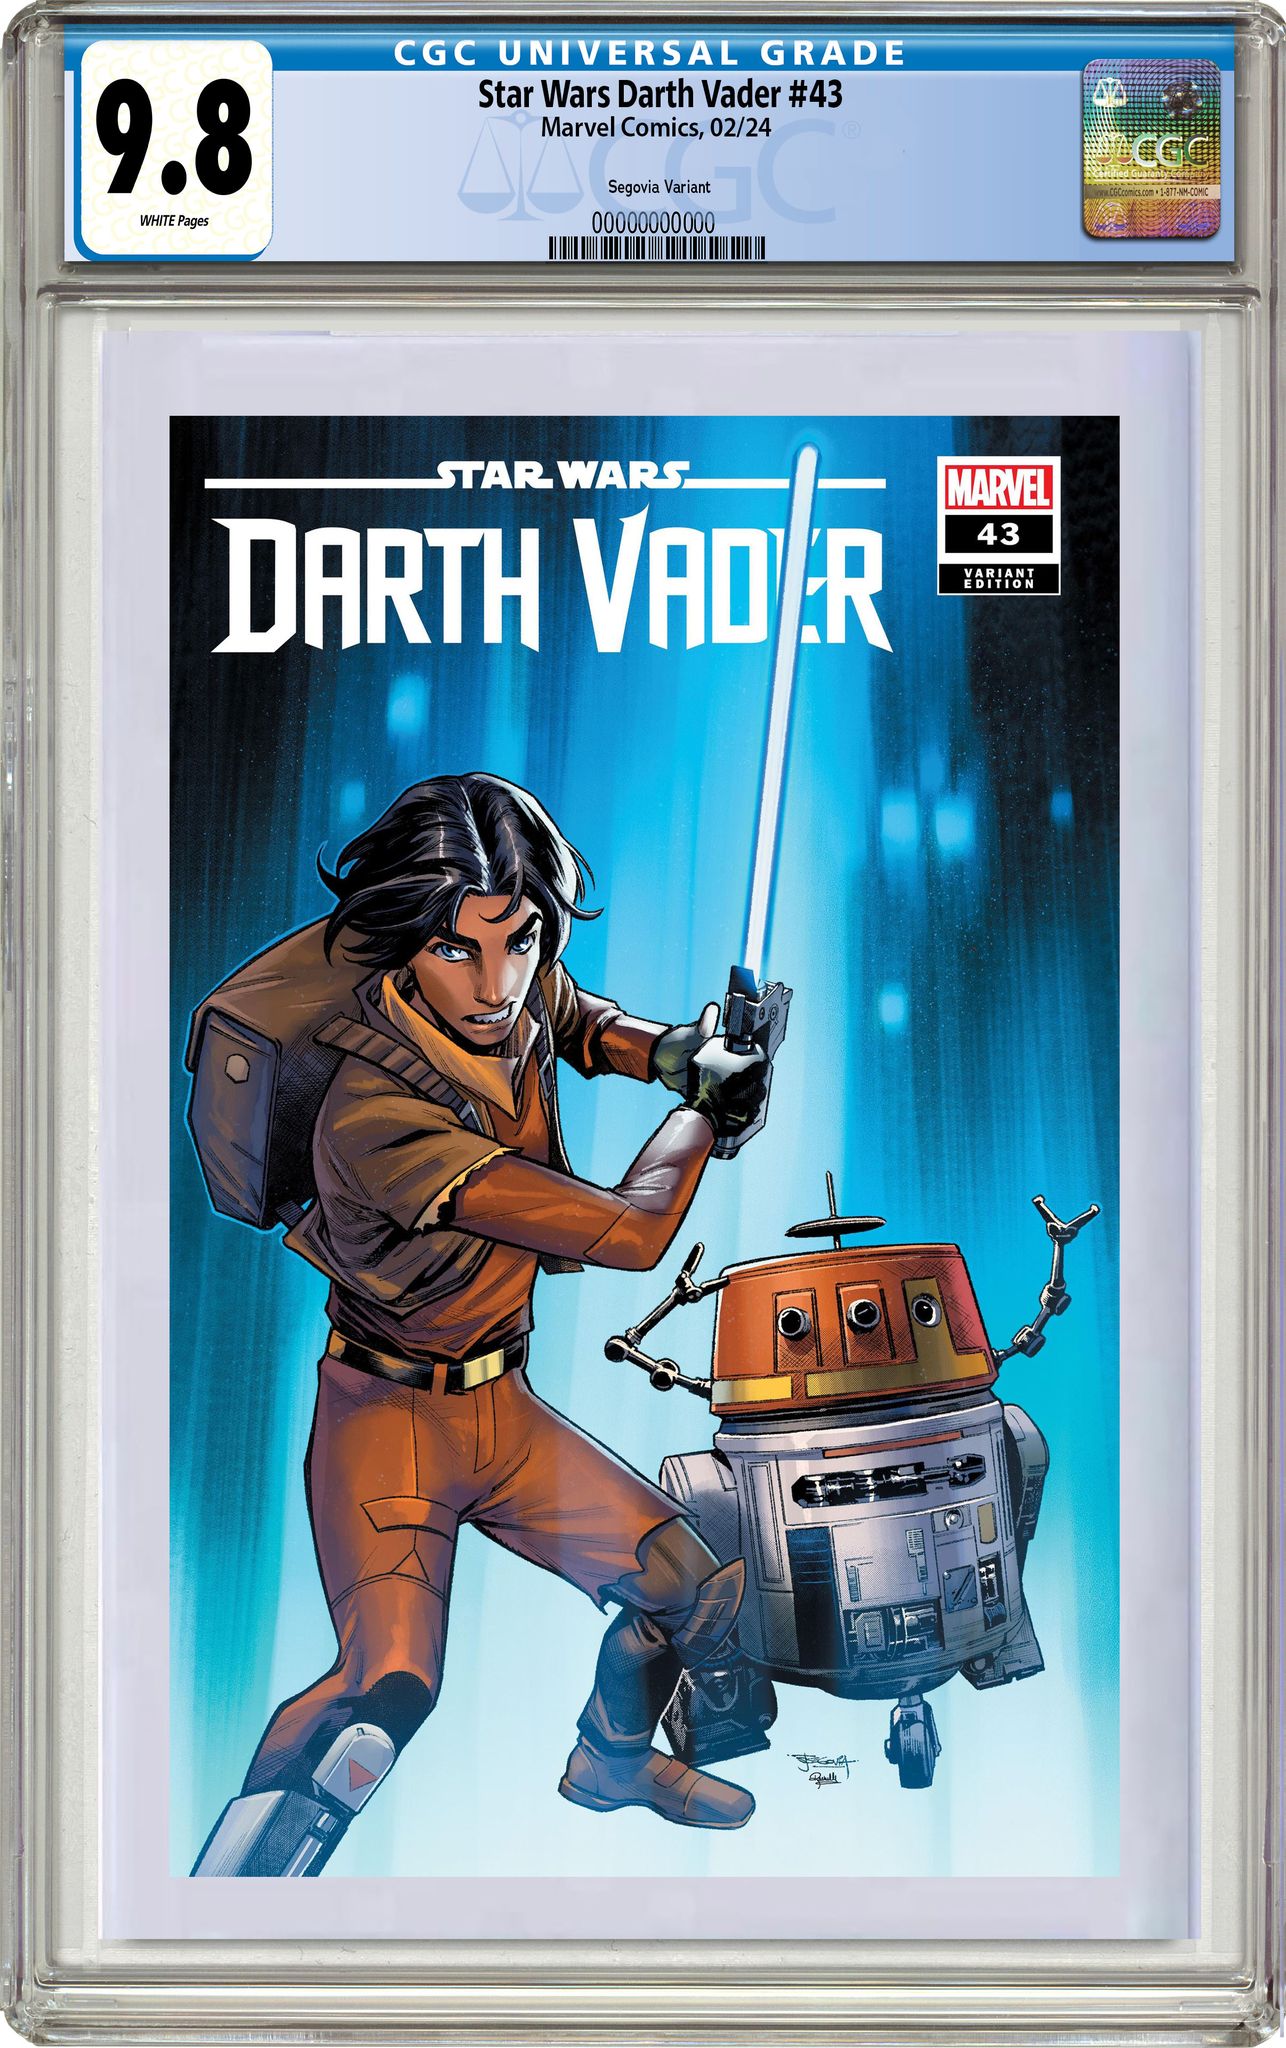 STAR WARS: DARTH VADER 43 STEPHEN SEGOVIA REBELS 10TH ANNIVERSARY LIMITED EDITION #2 OF 4 EXCLUSIVE SERIES OPTIONS - 02/14/24